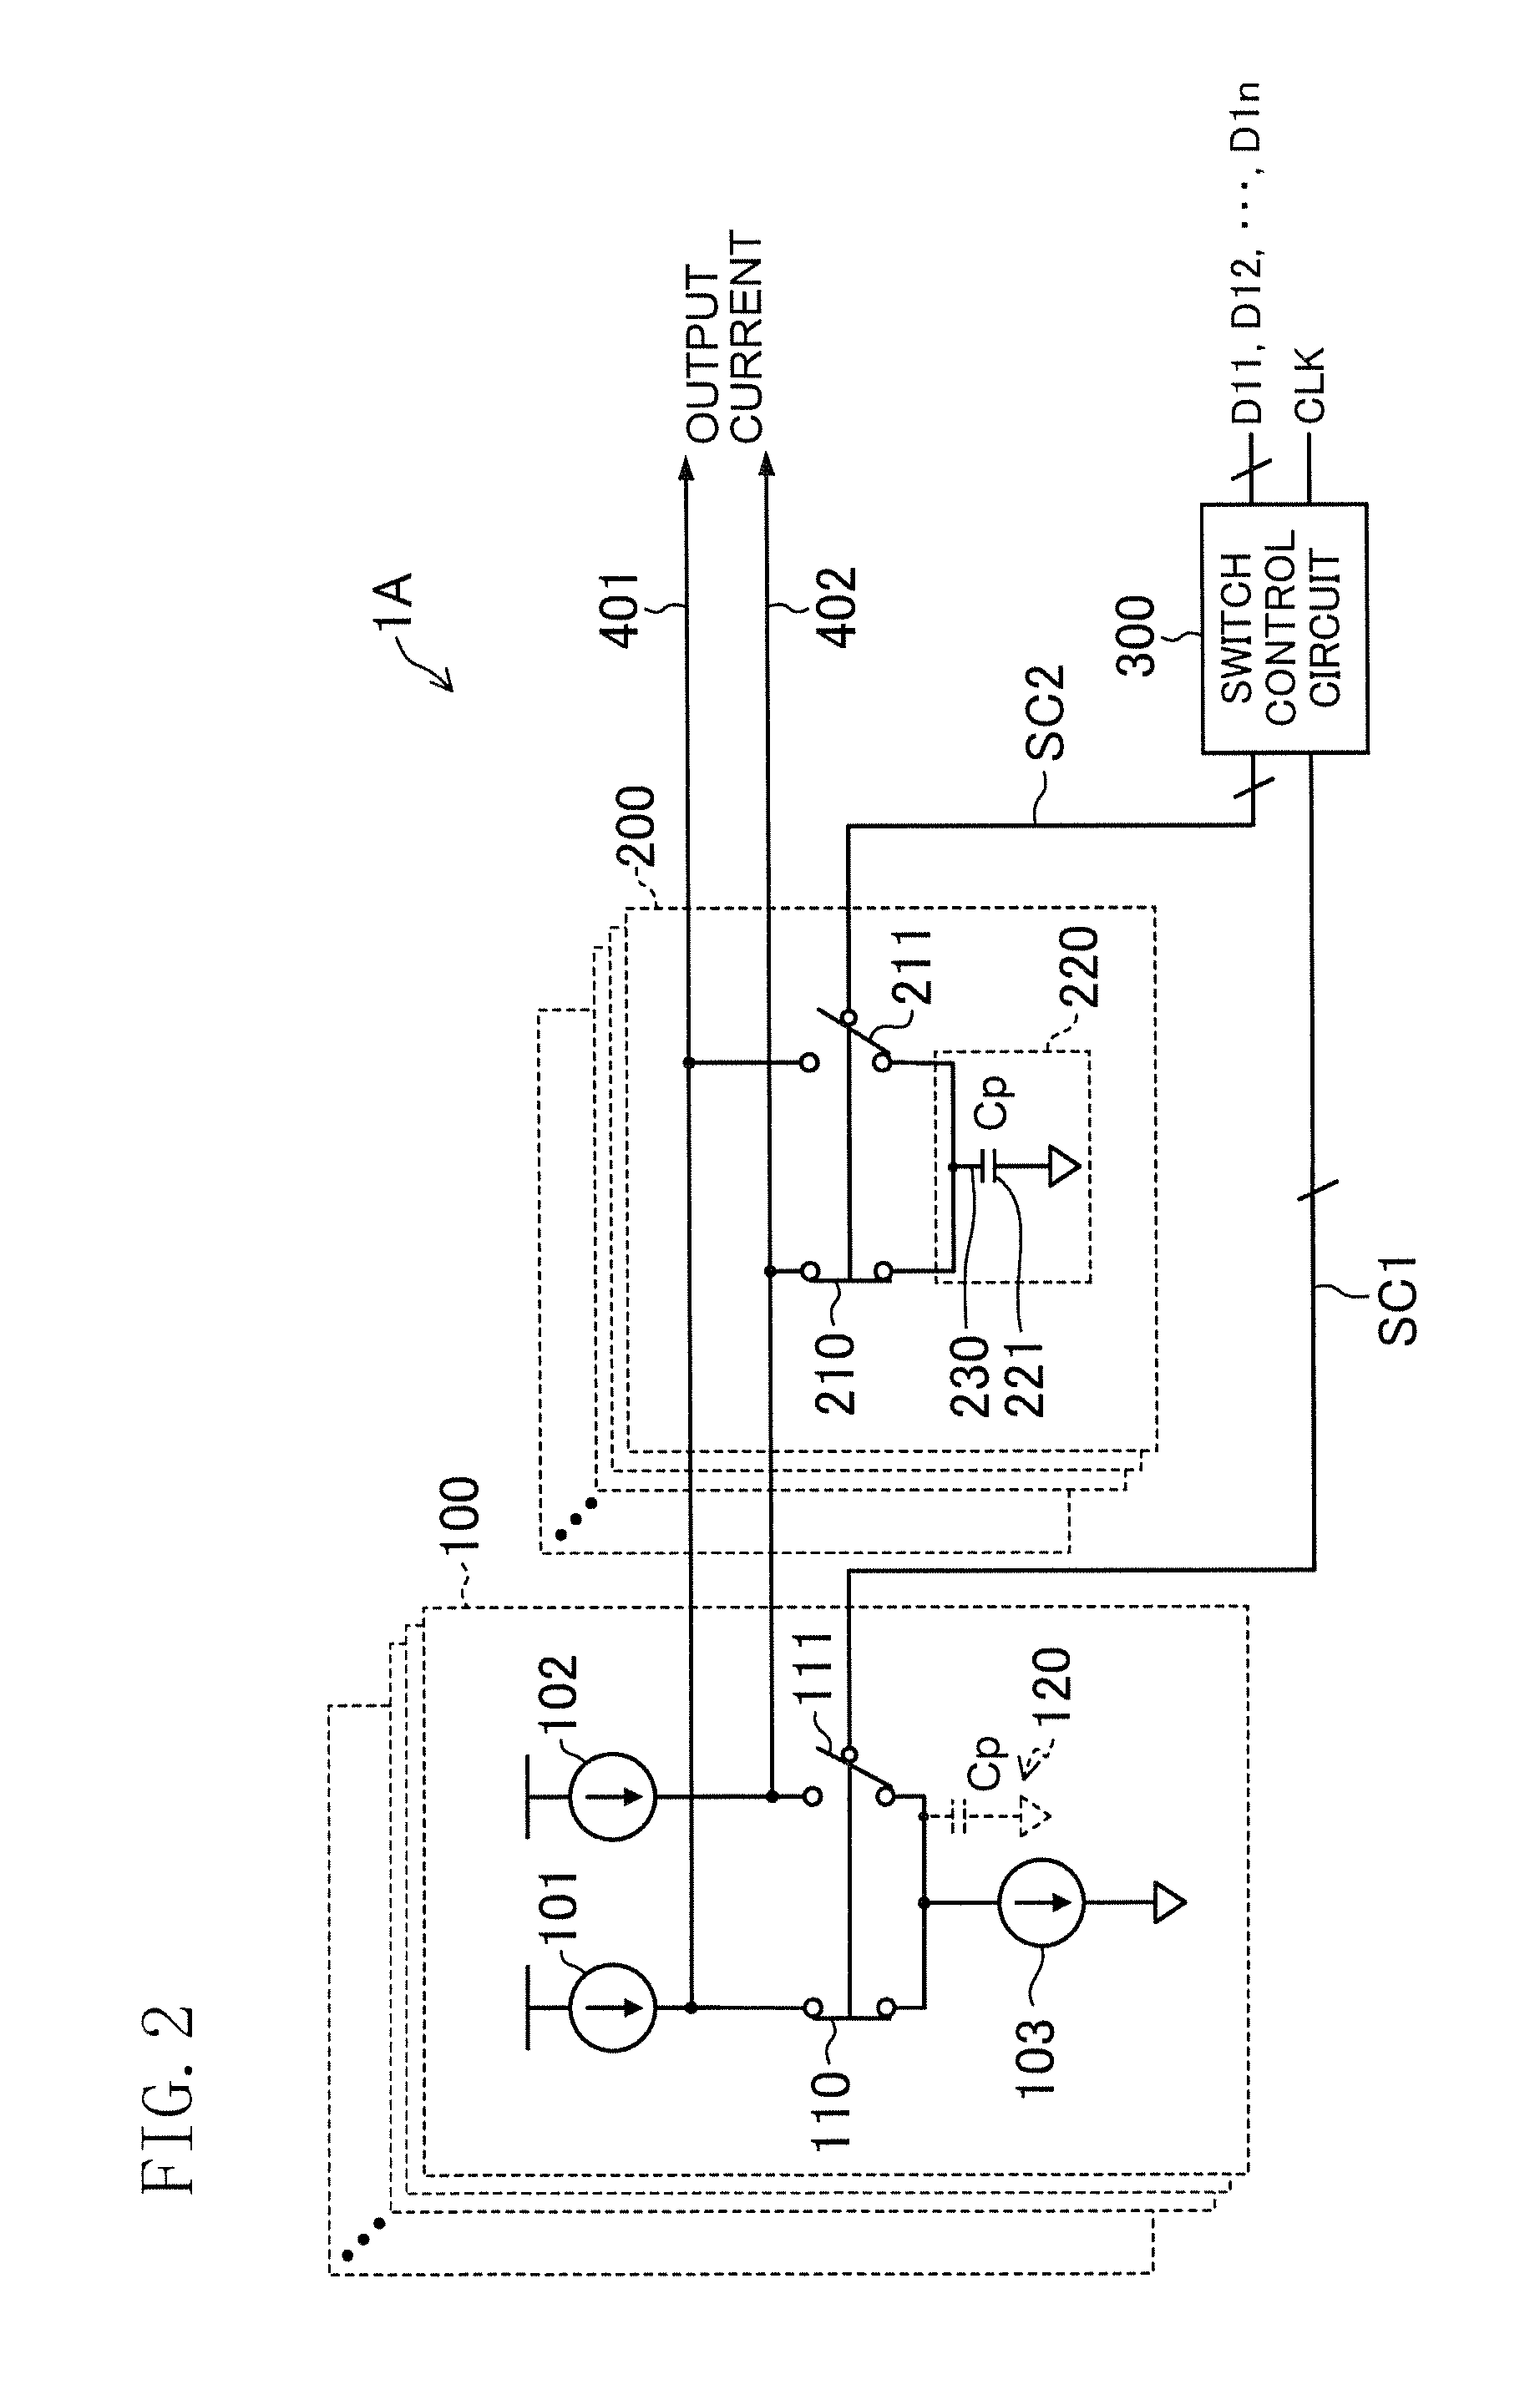 Current type D/A converter, delta sigma modulator, and communications device